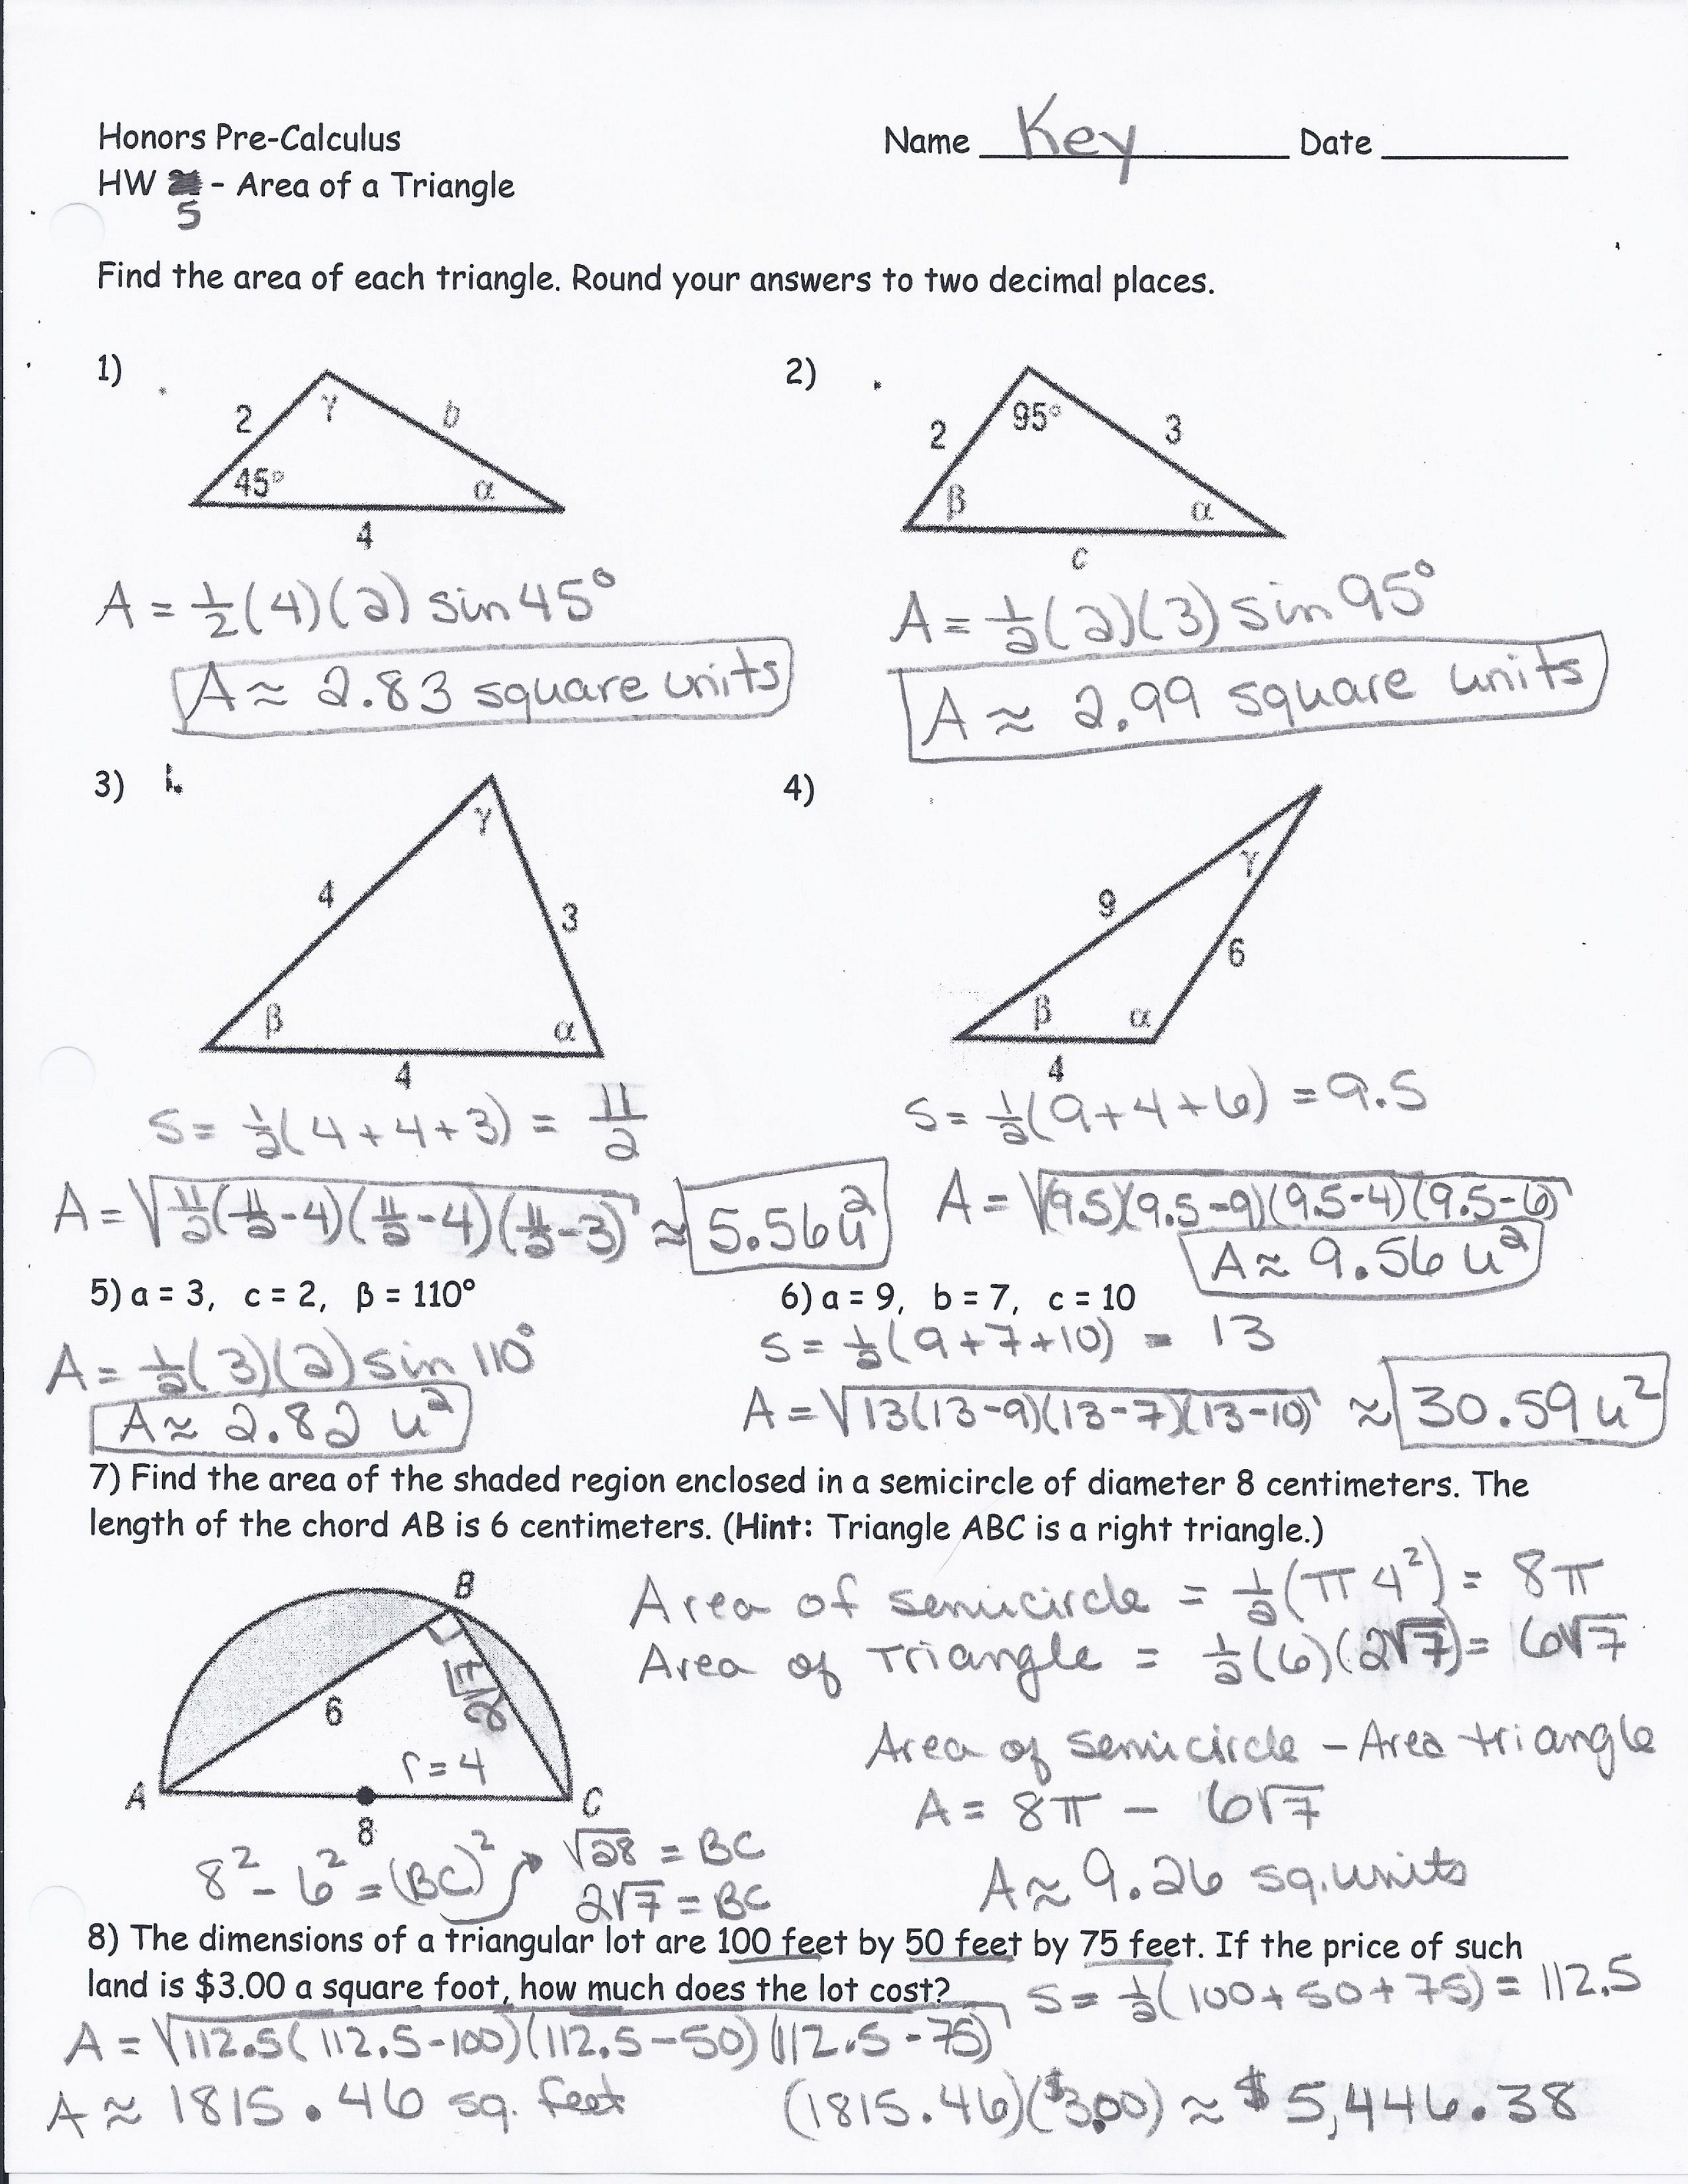 Right Triangle Trigonometry Worksheet With Answers  Geekchicpro With Regard To Trigonometry Practice Worksheets